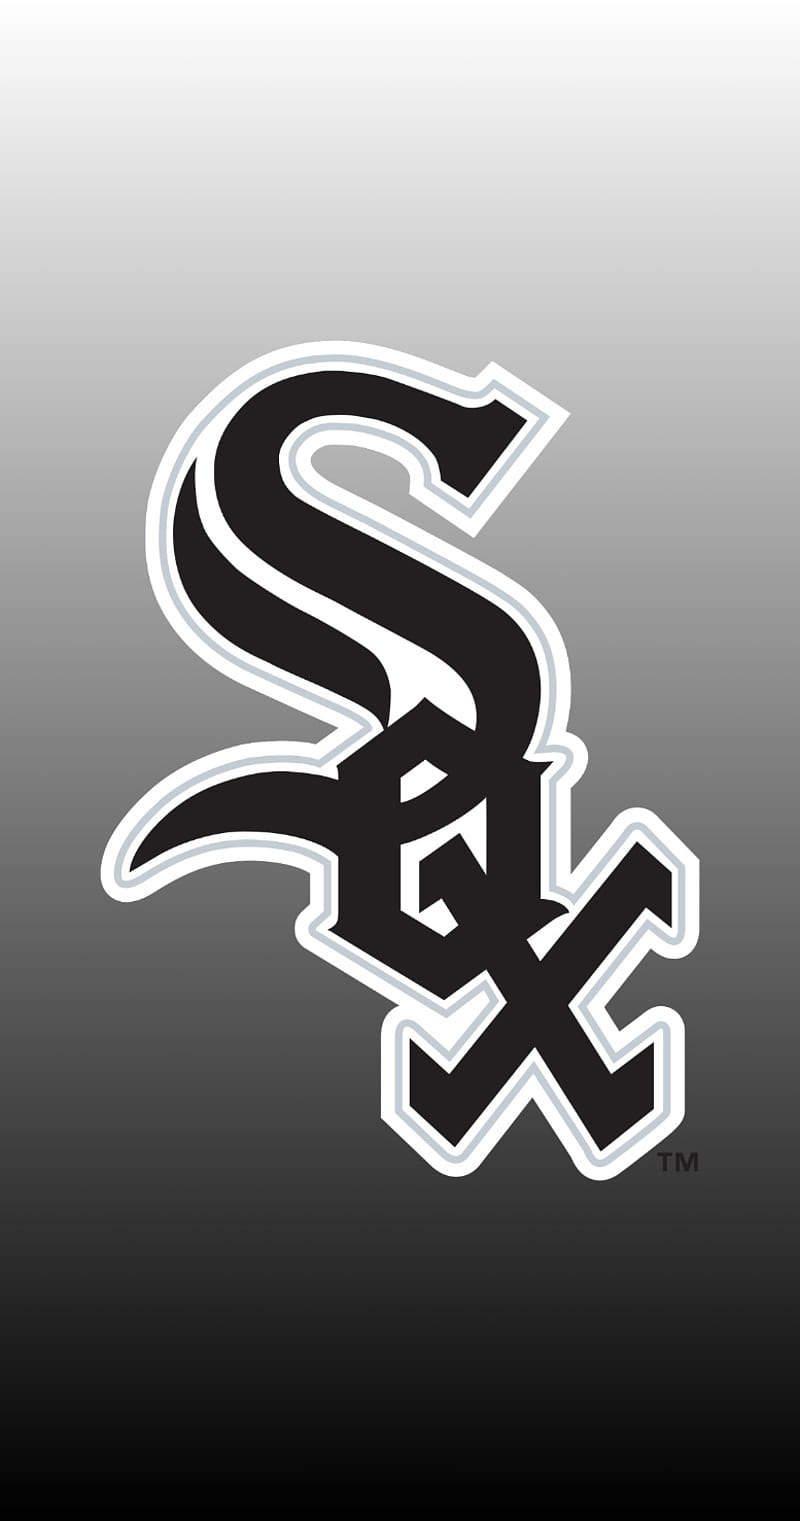 I made white sox wallpapers Check my comment for the links to 4 more  r whitesox